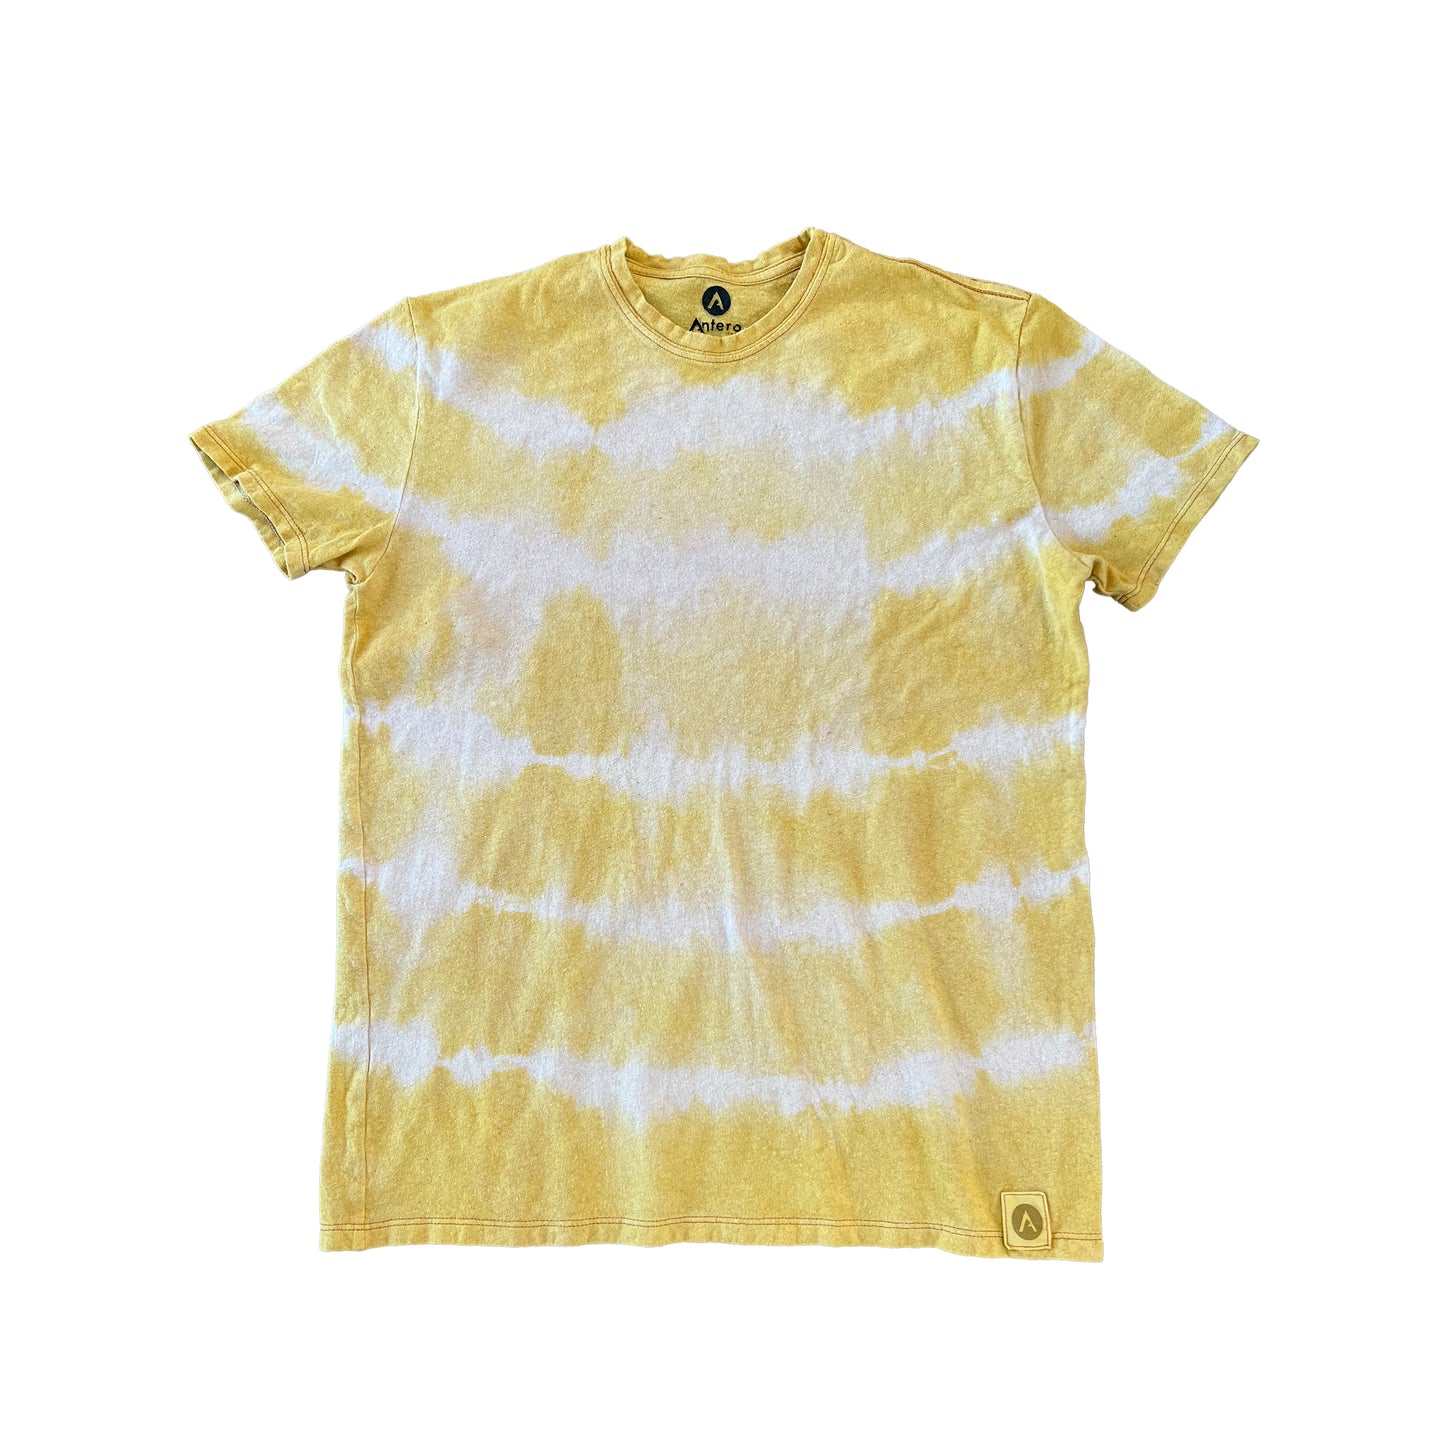 Men's Naturally Dyed Tee